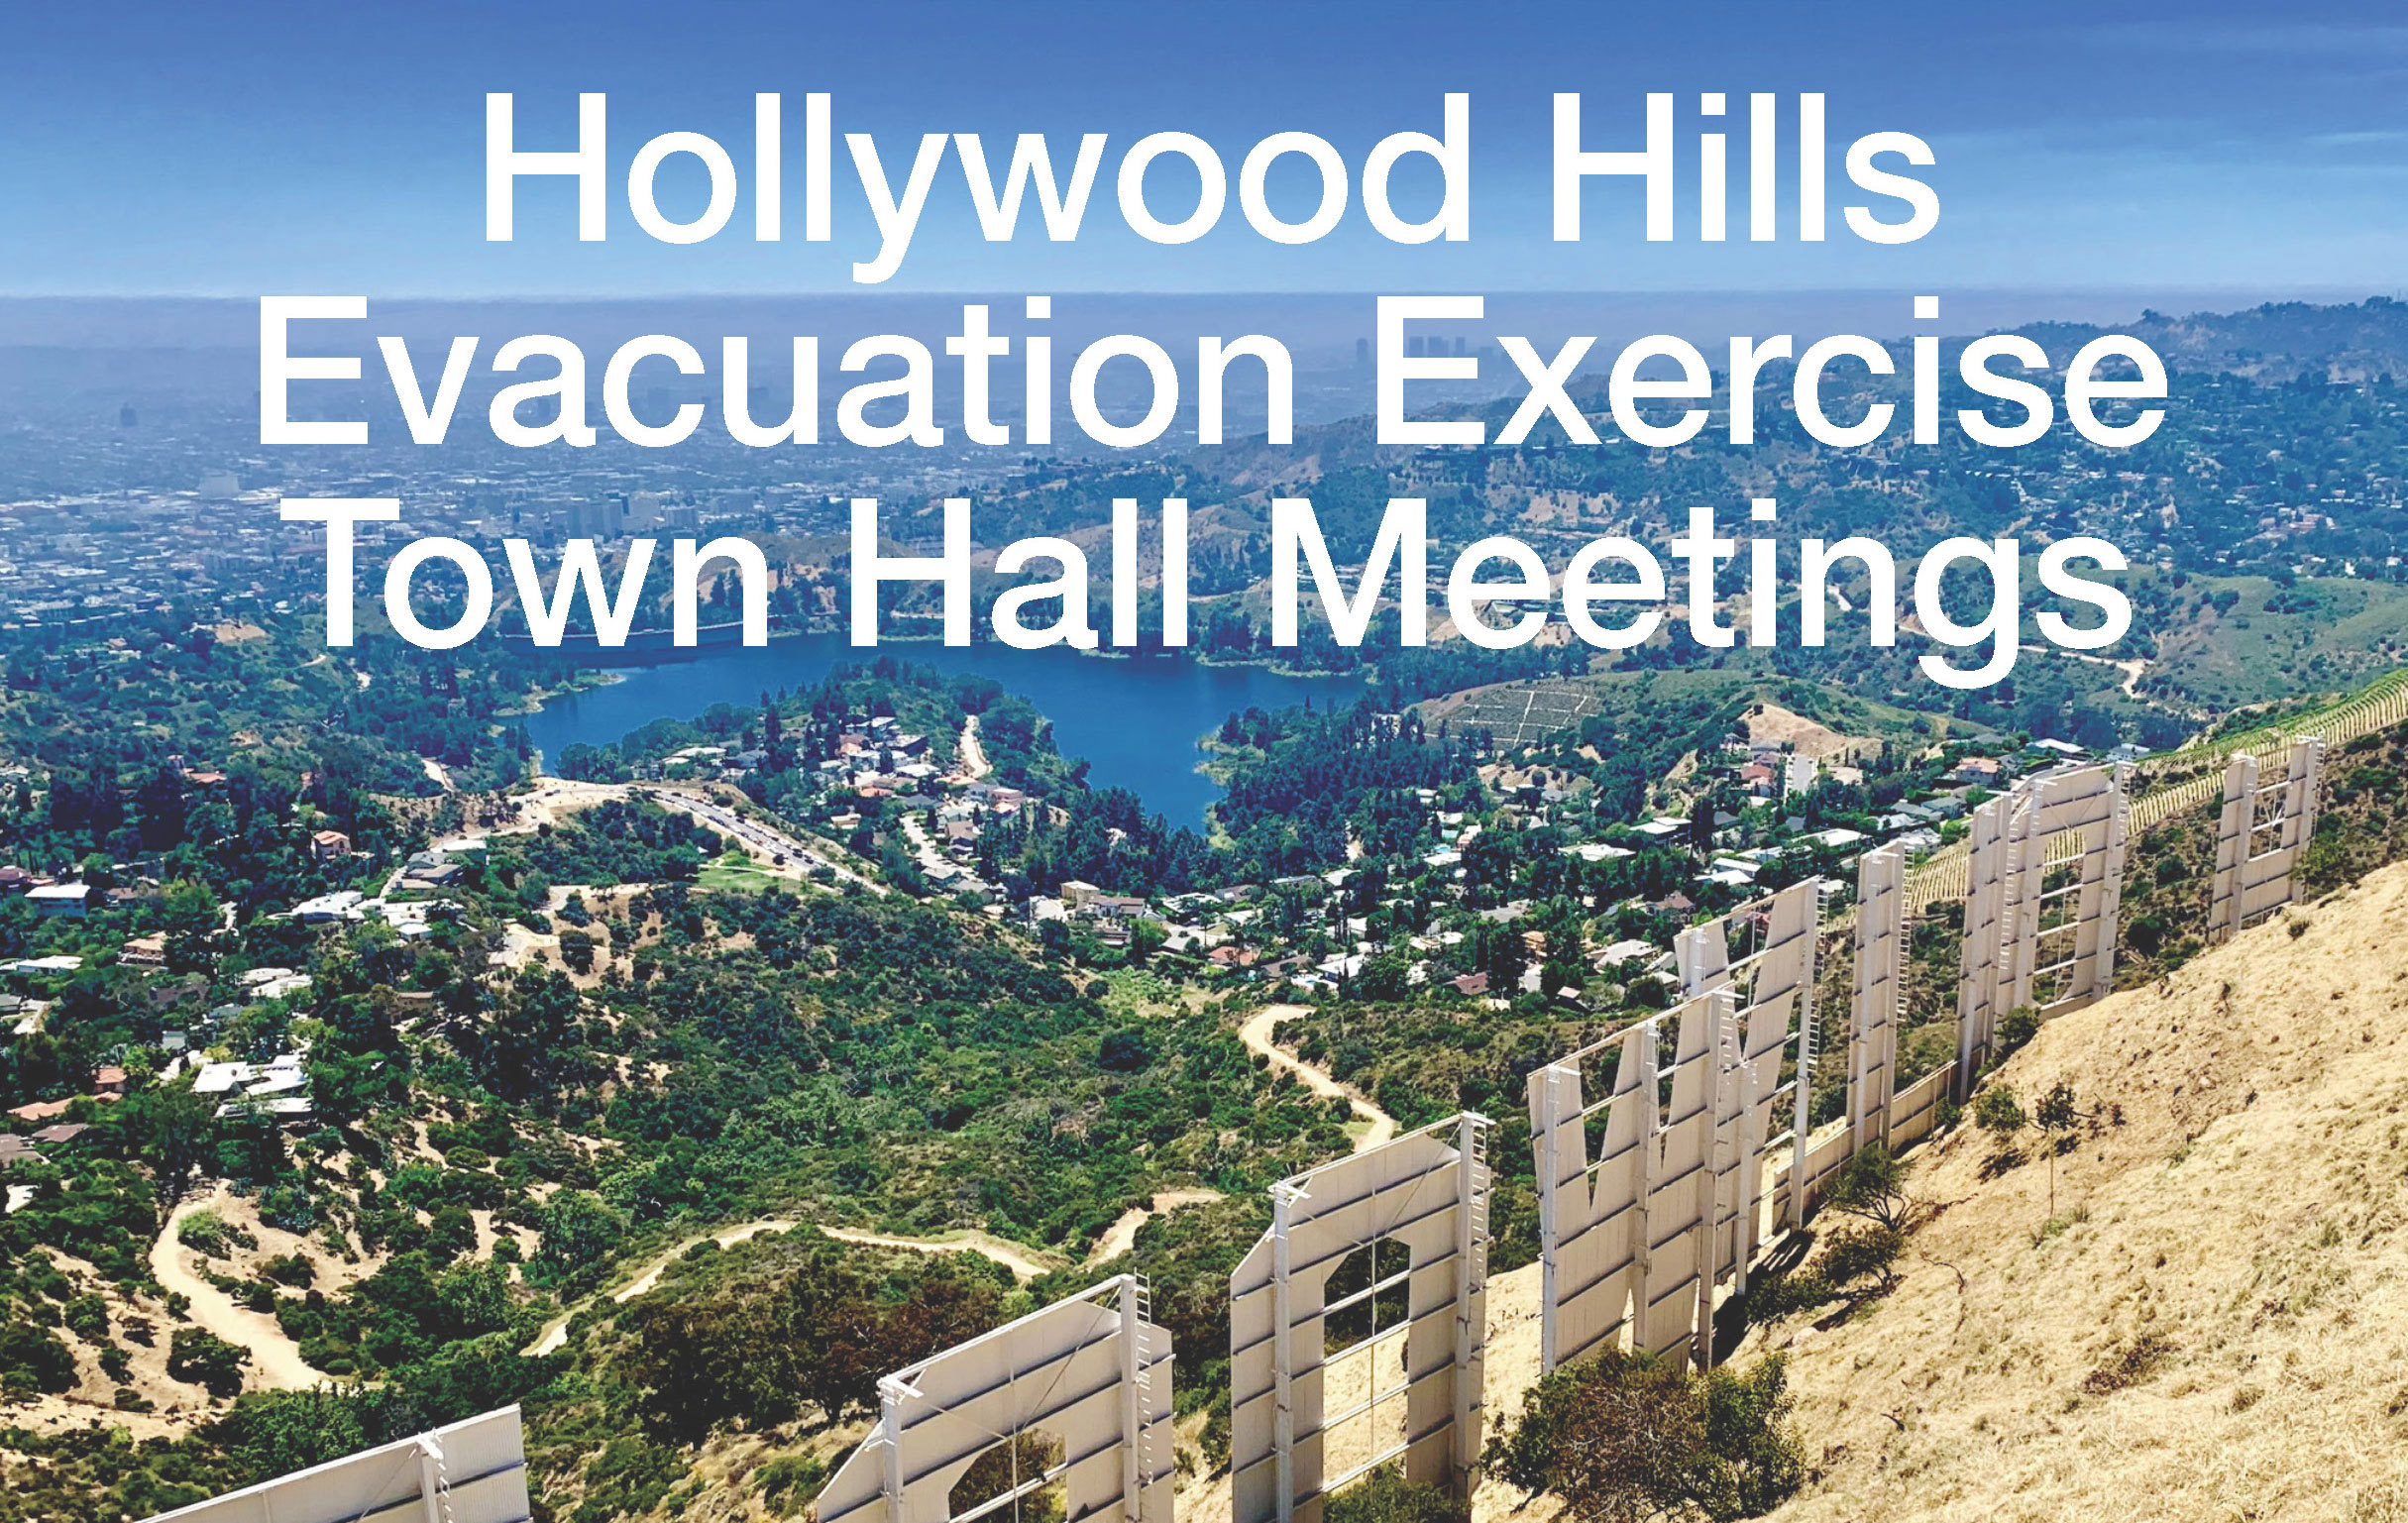 Hollywood Hills Evacuation Exercise Town Halls